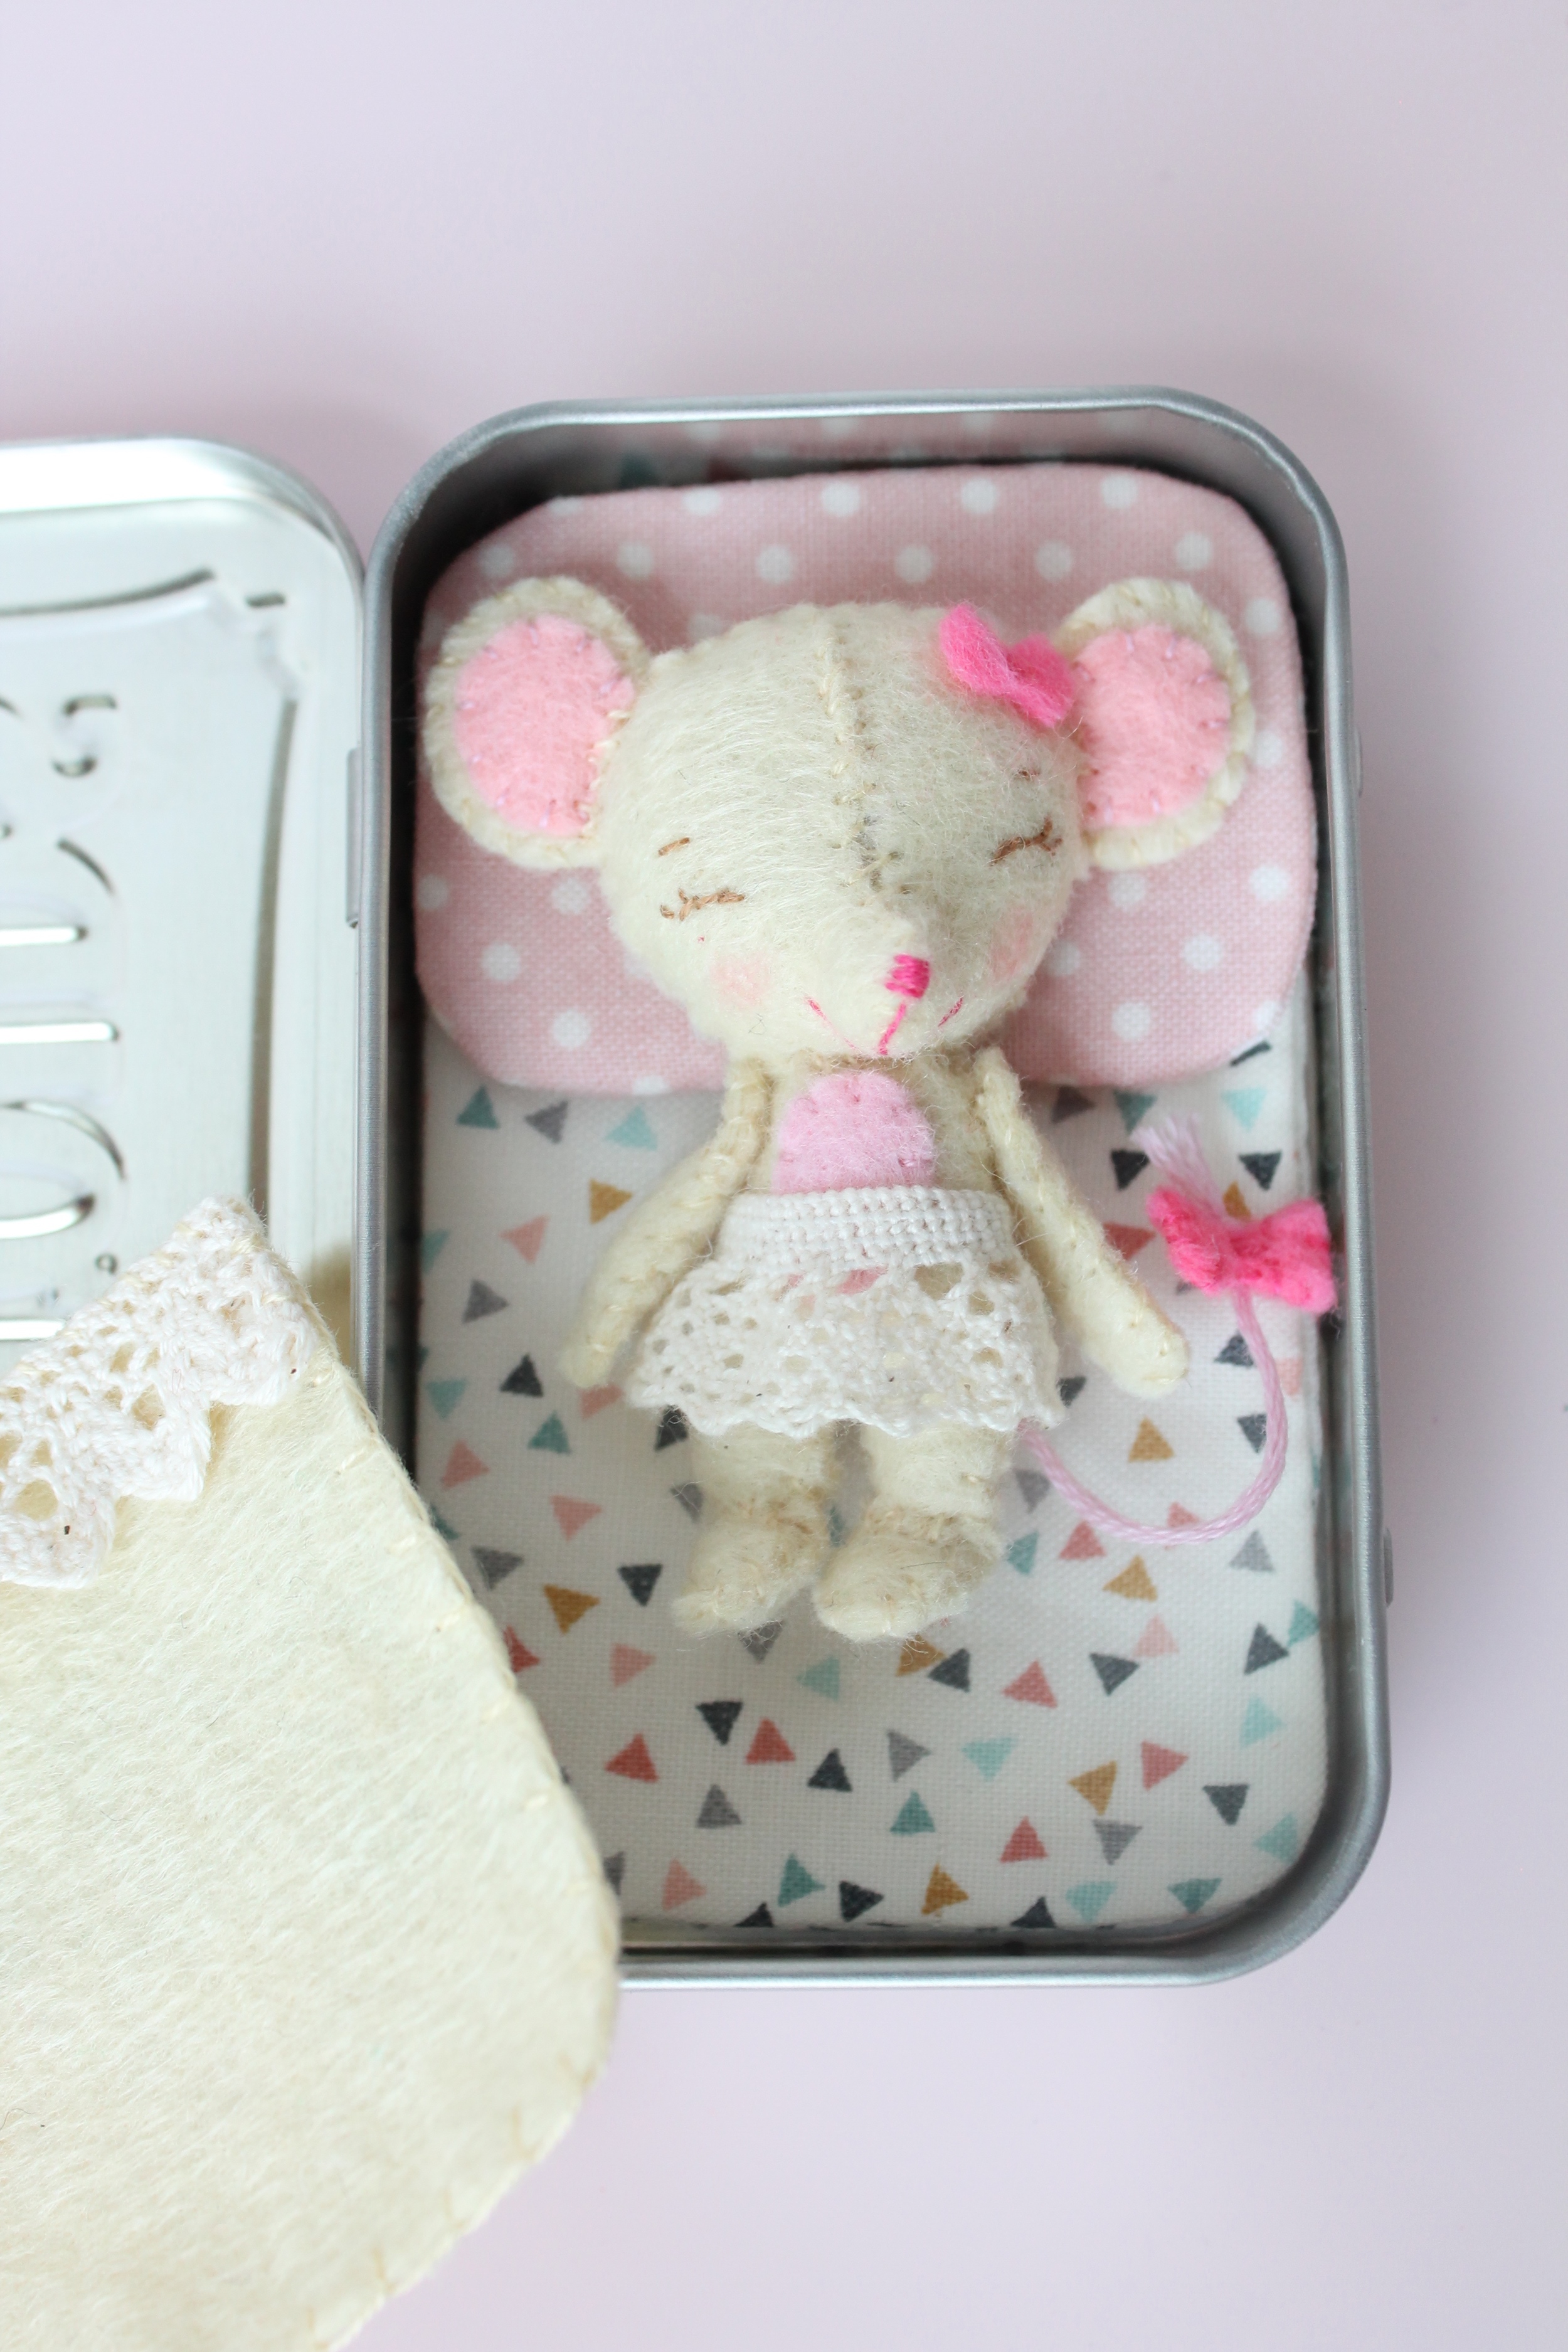 Little Mouse in a Tin. Hand sewn felt mouse with mattress pillow and blanket all inside a tin of Altoids.